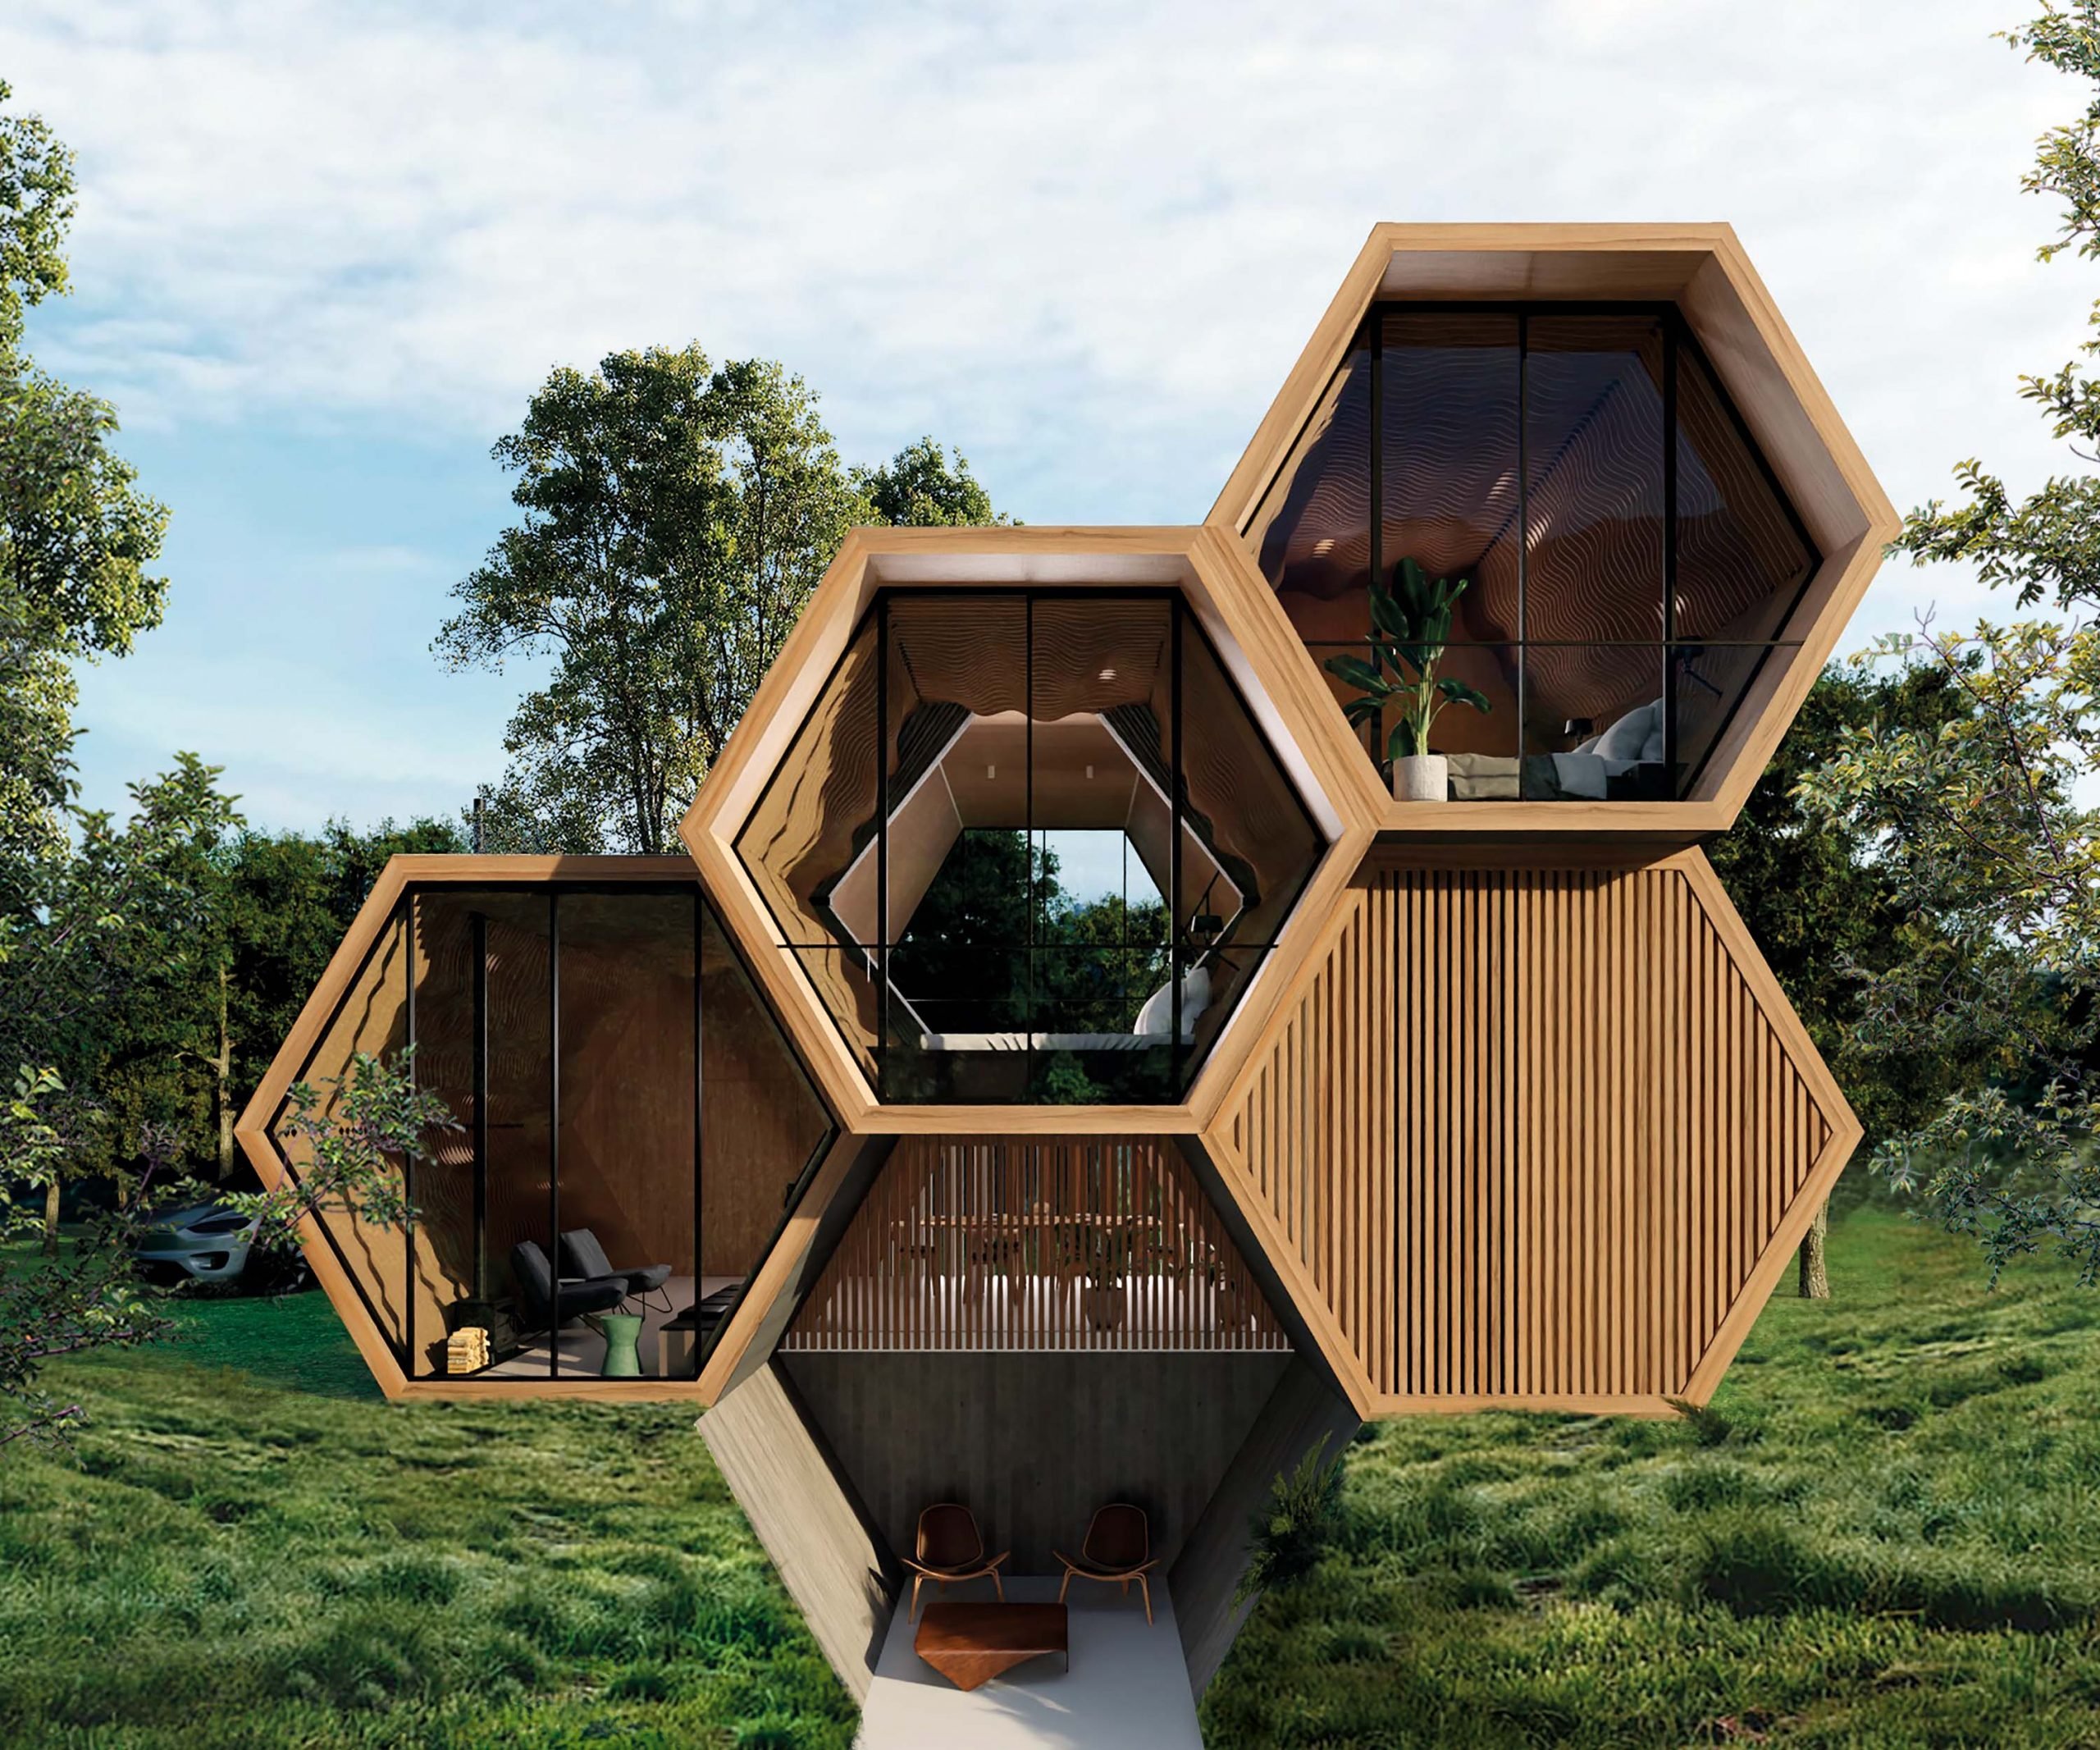 Sustainable Beehive House in the Rainforest created by Esteban A. for Airbnb OMG! Fund